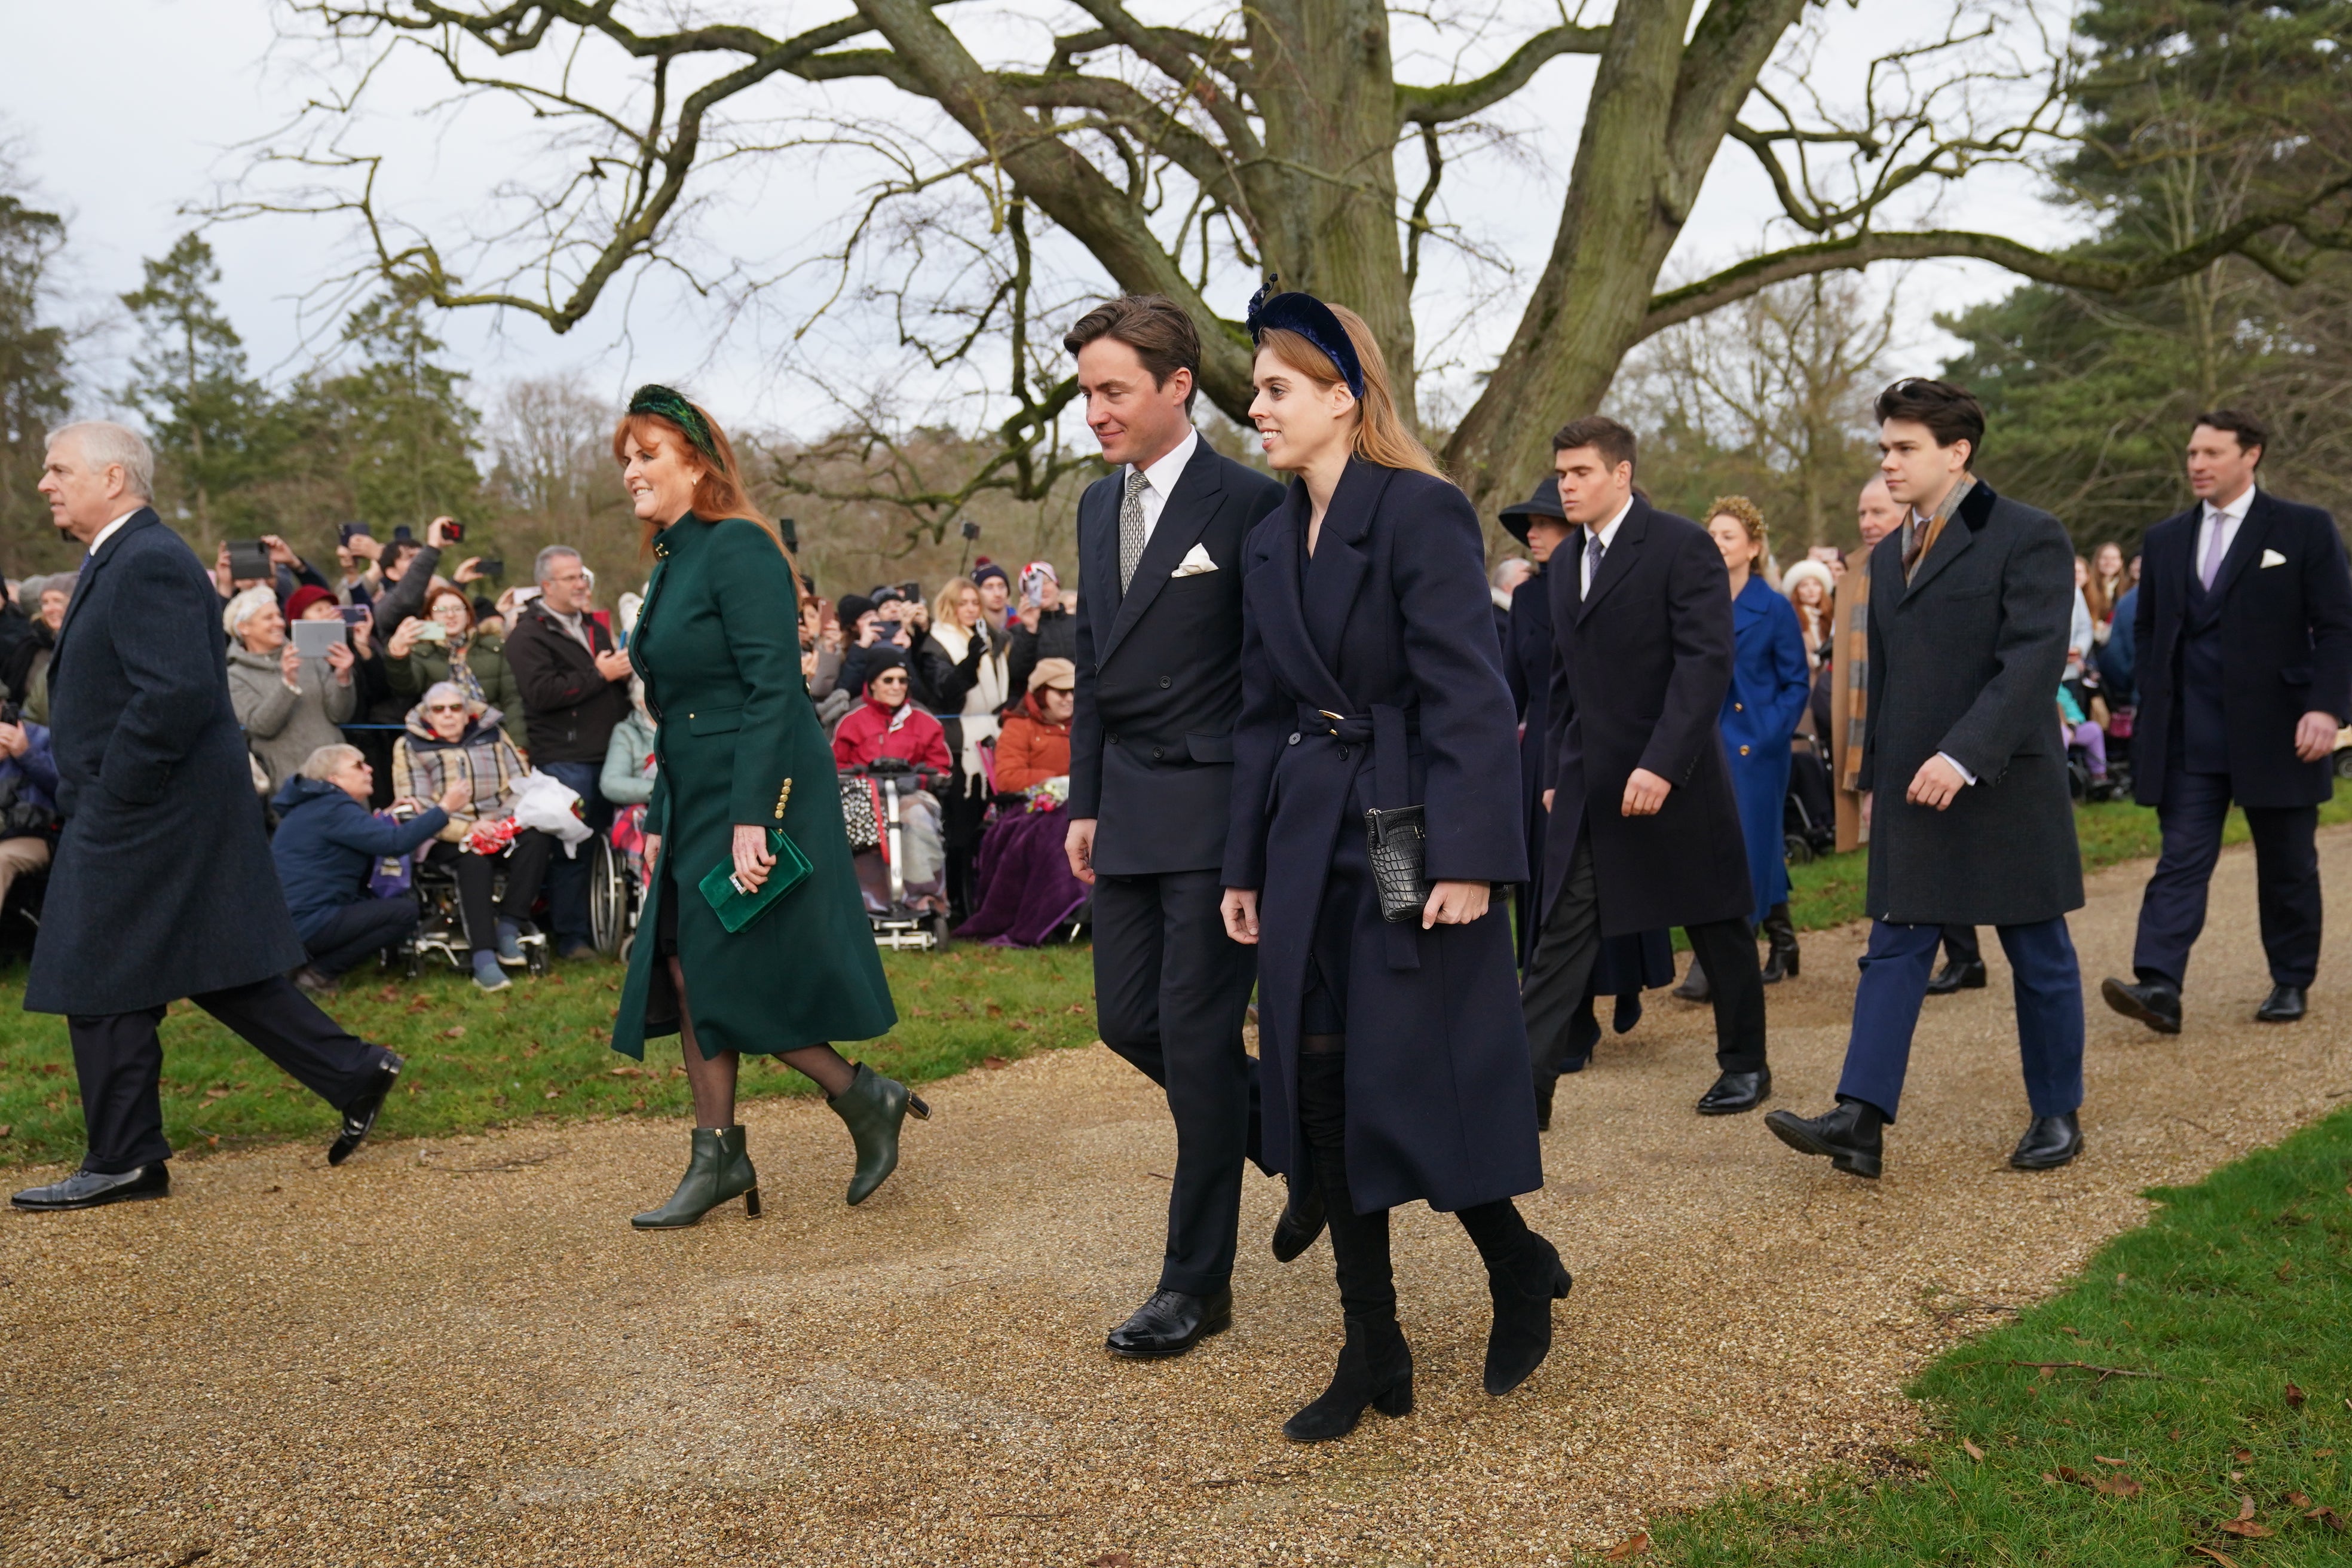 Princess Beatrice and Sarah Ferguson were also seen departing